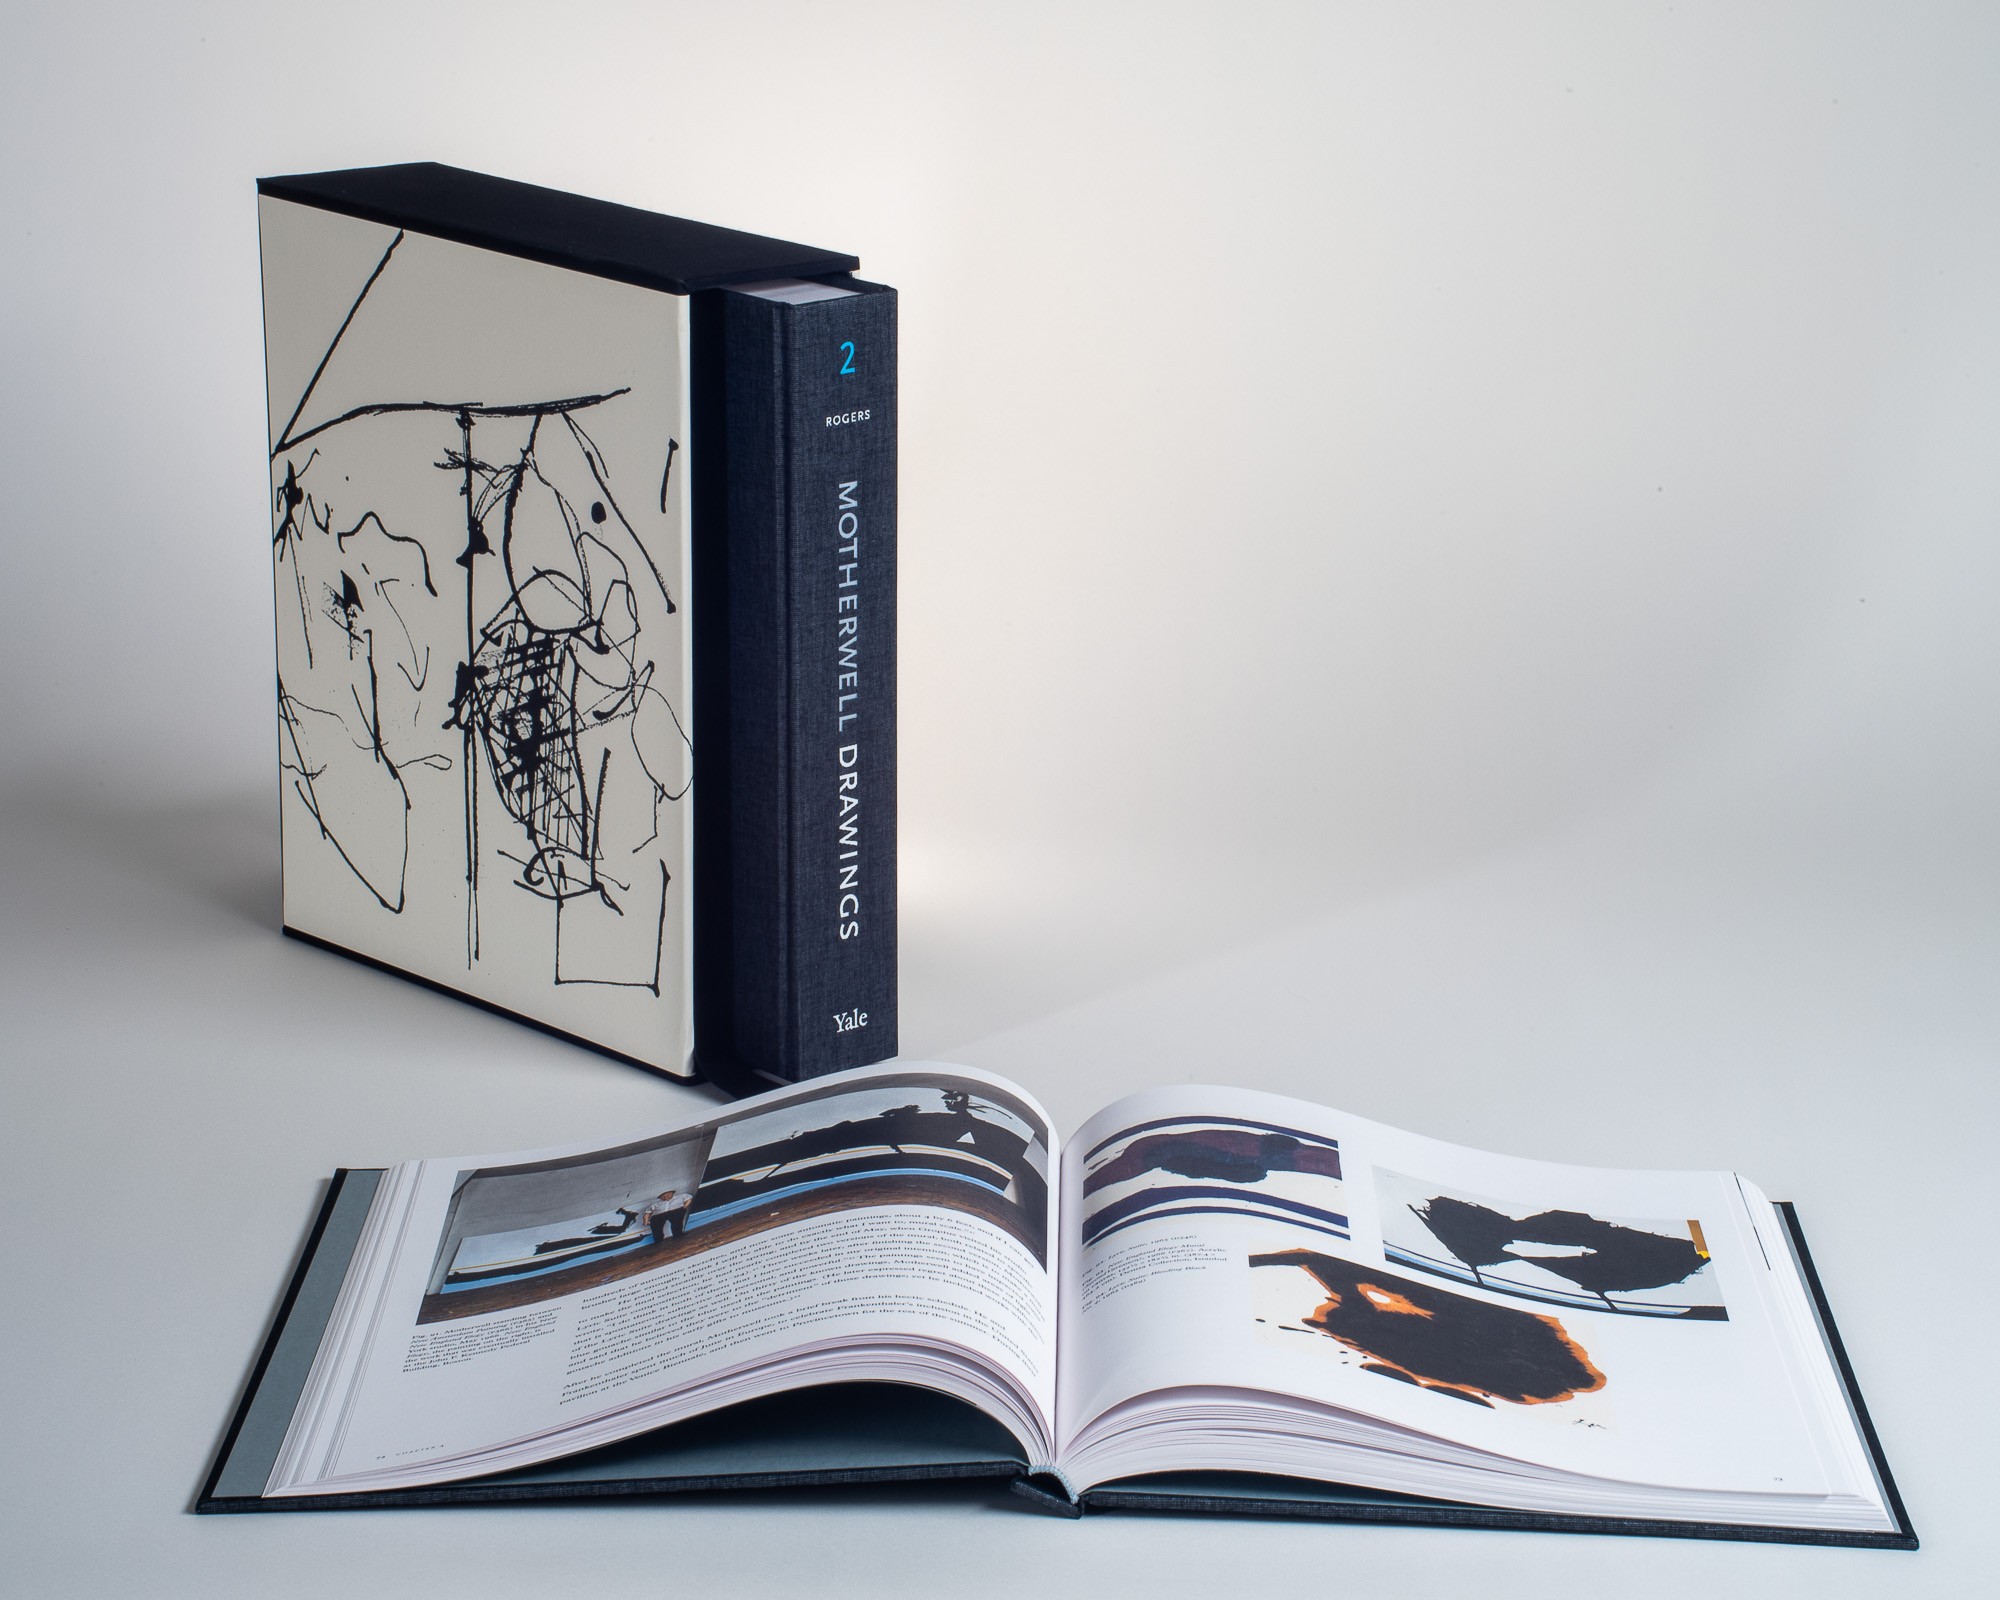 The Motherwell Drawings Catalogue Raisonné case standing upright, with volume 1 opened to a page